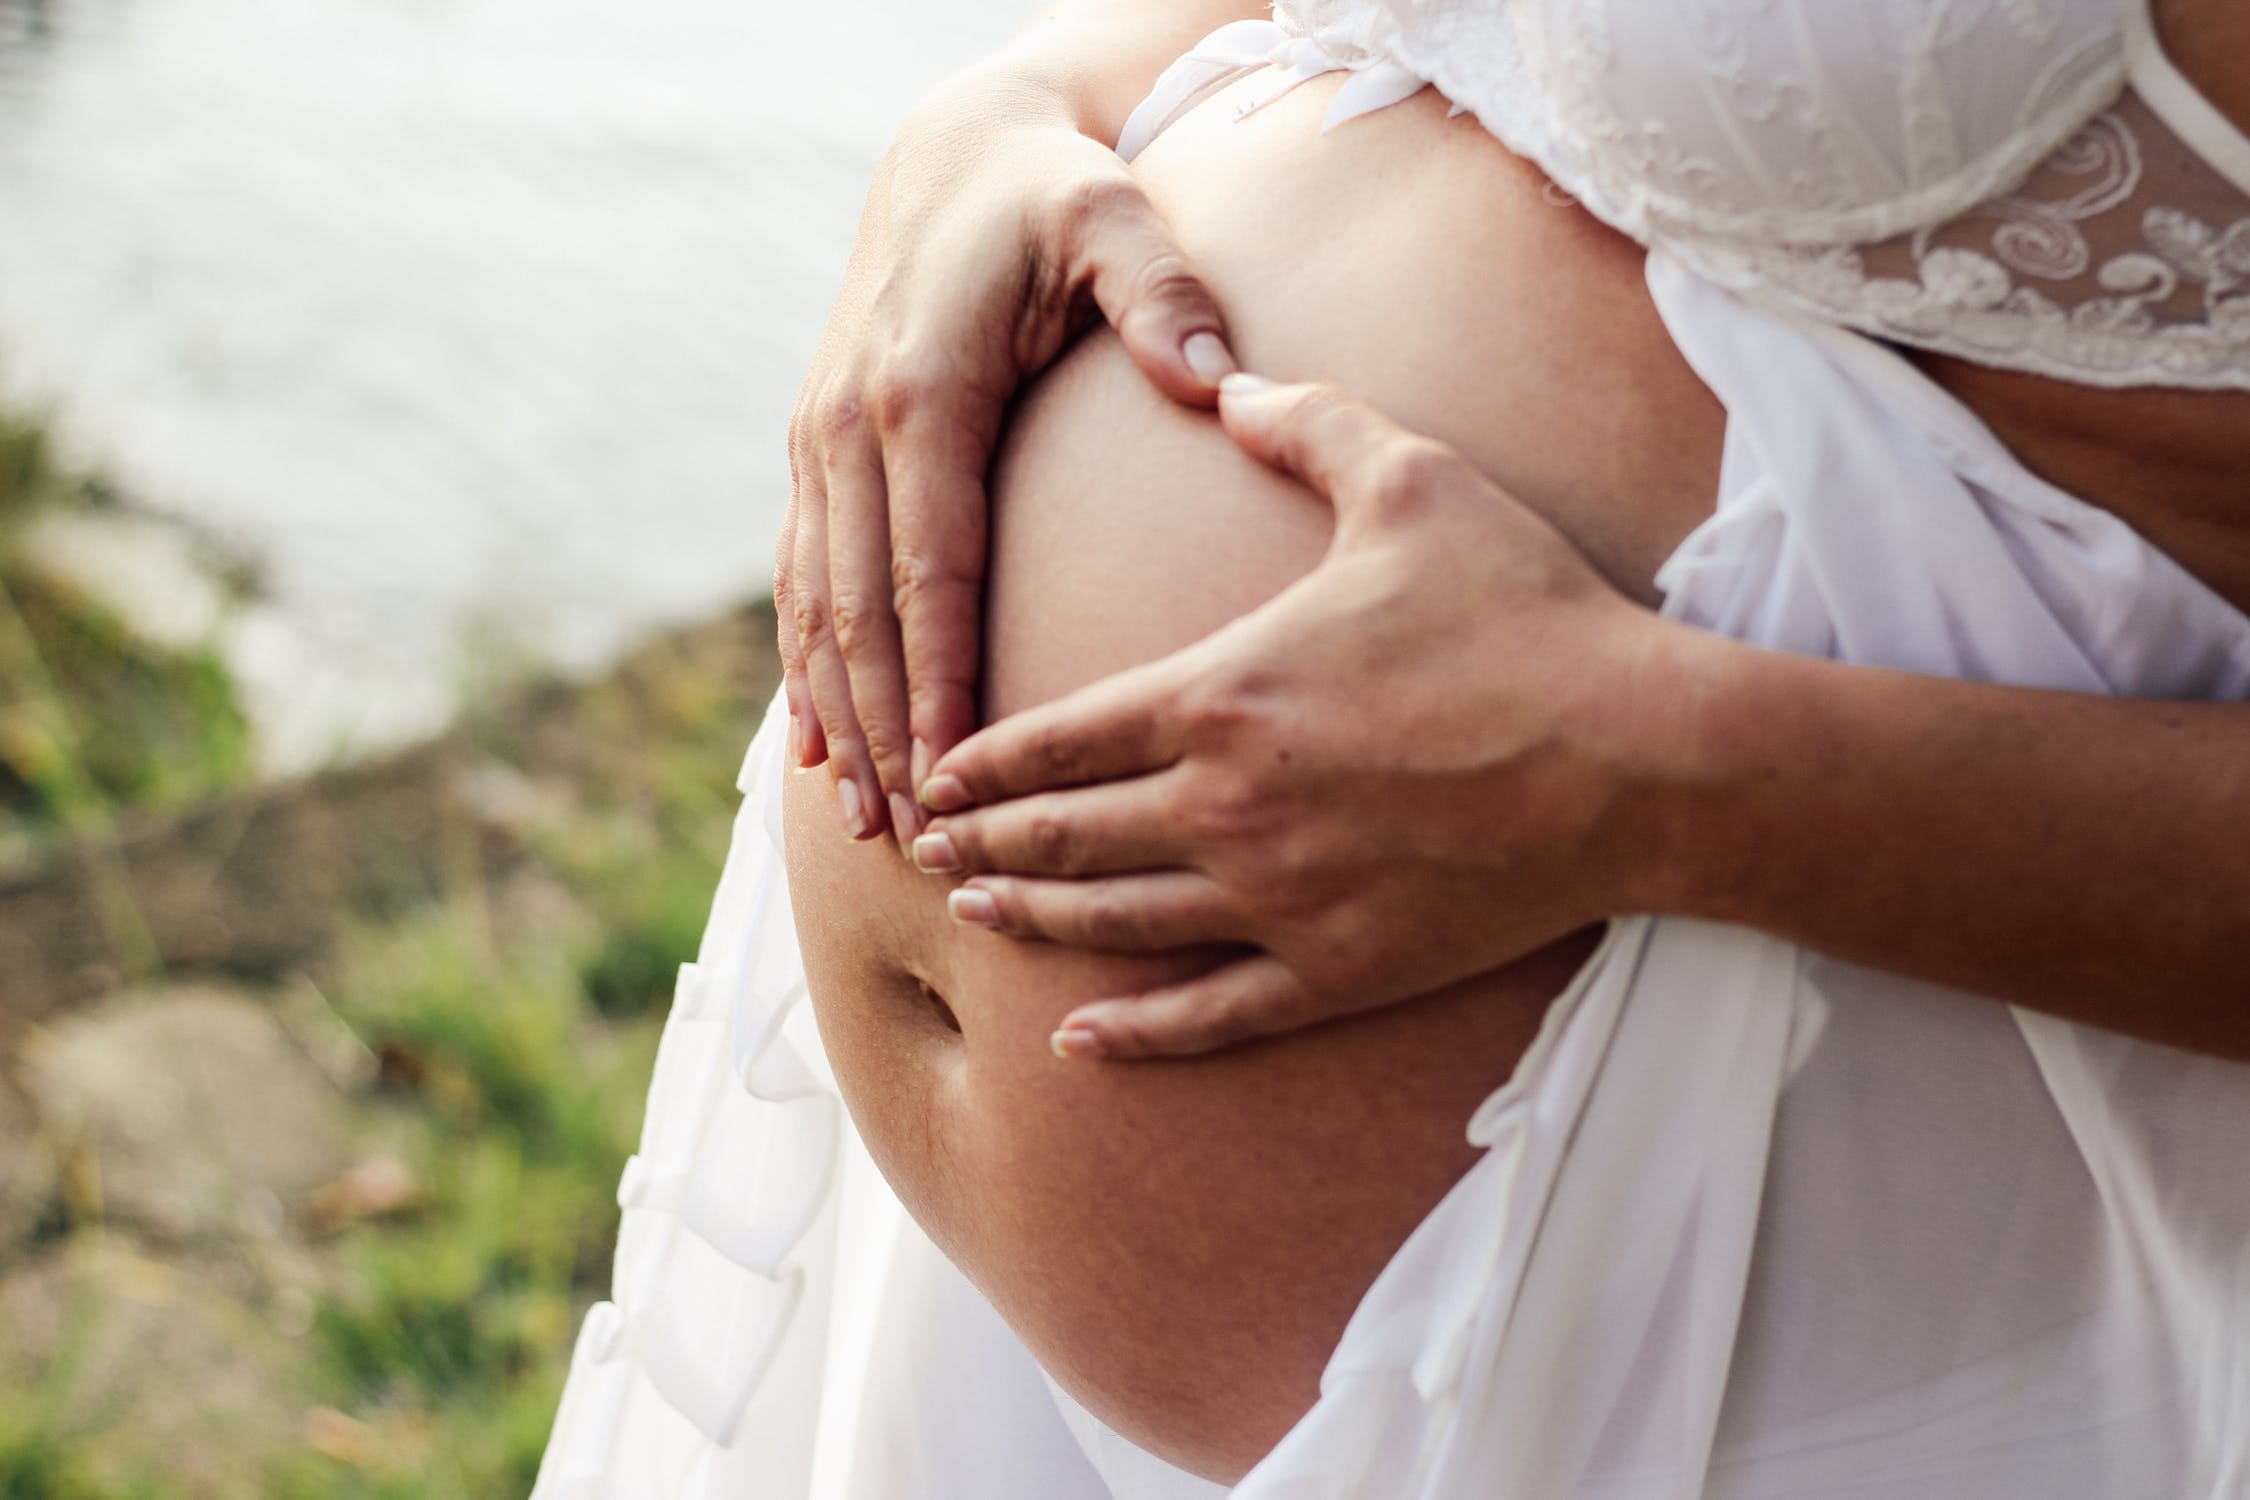 How To Cope With Social Distancing During Pregnancy